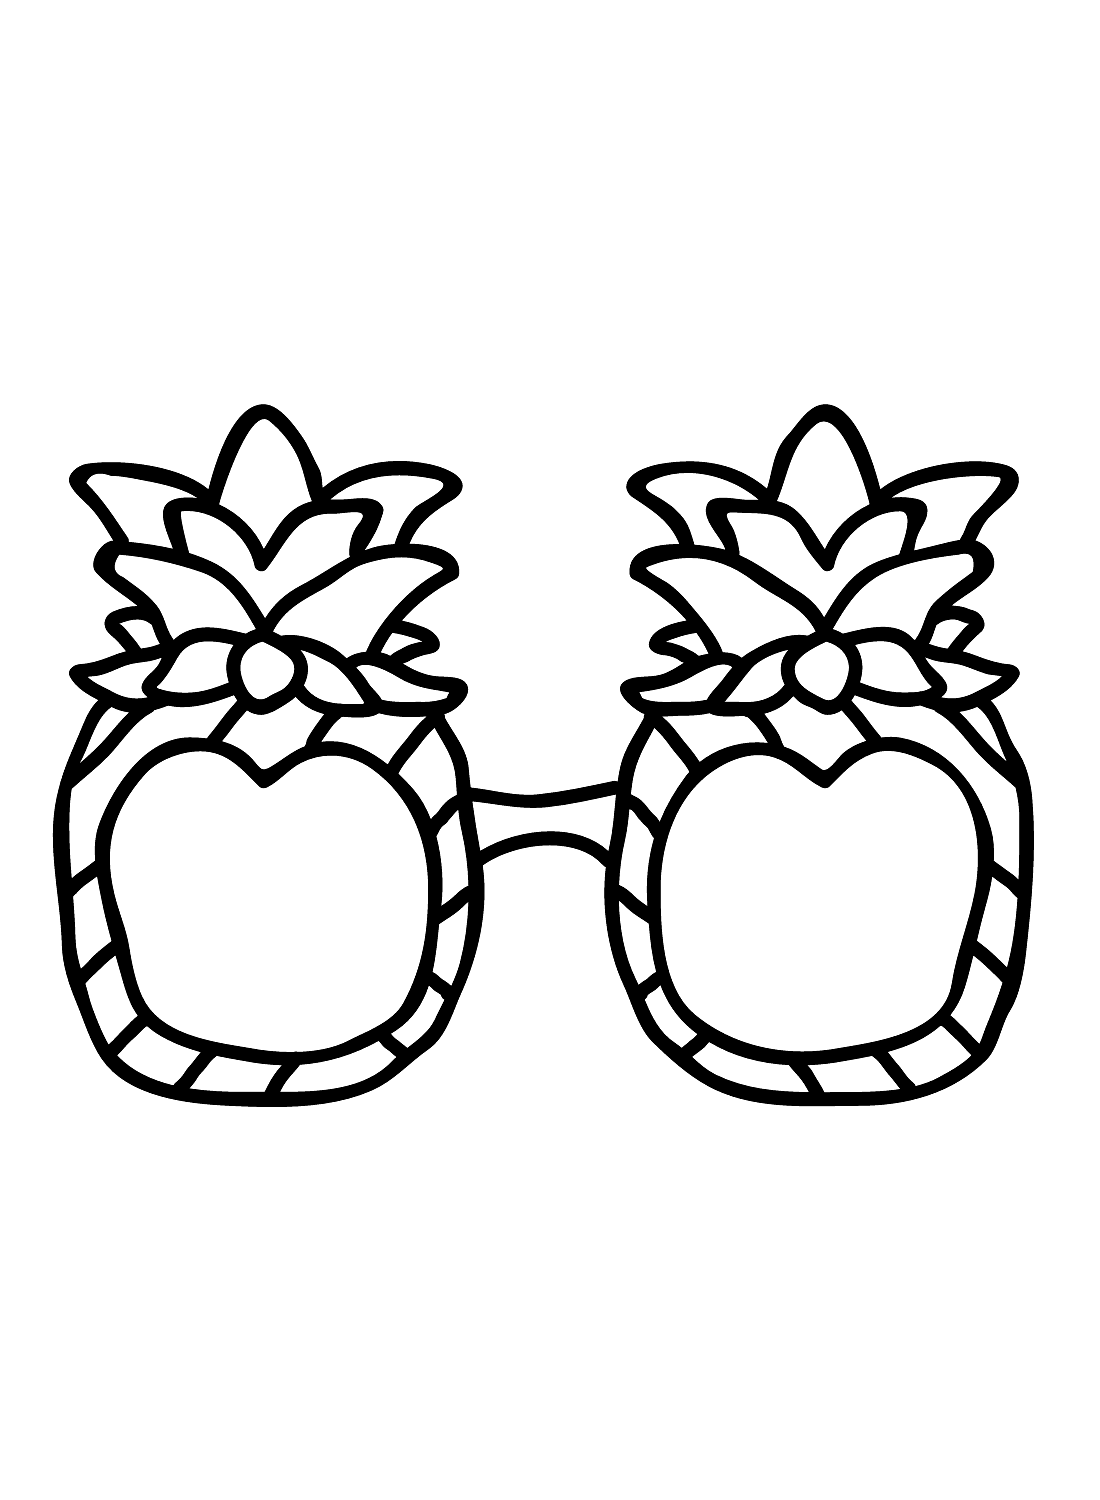 Pineapple Shaped Sunglasses Coloring Page